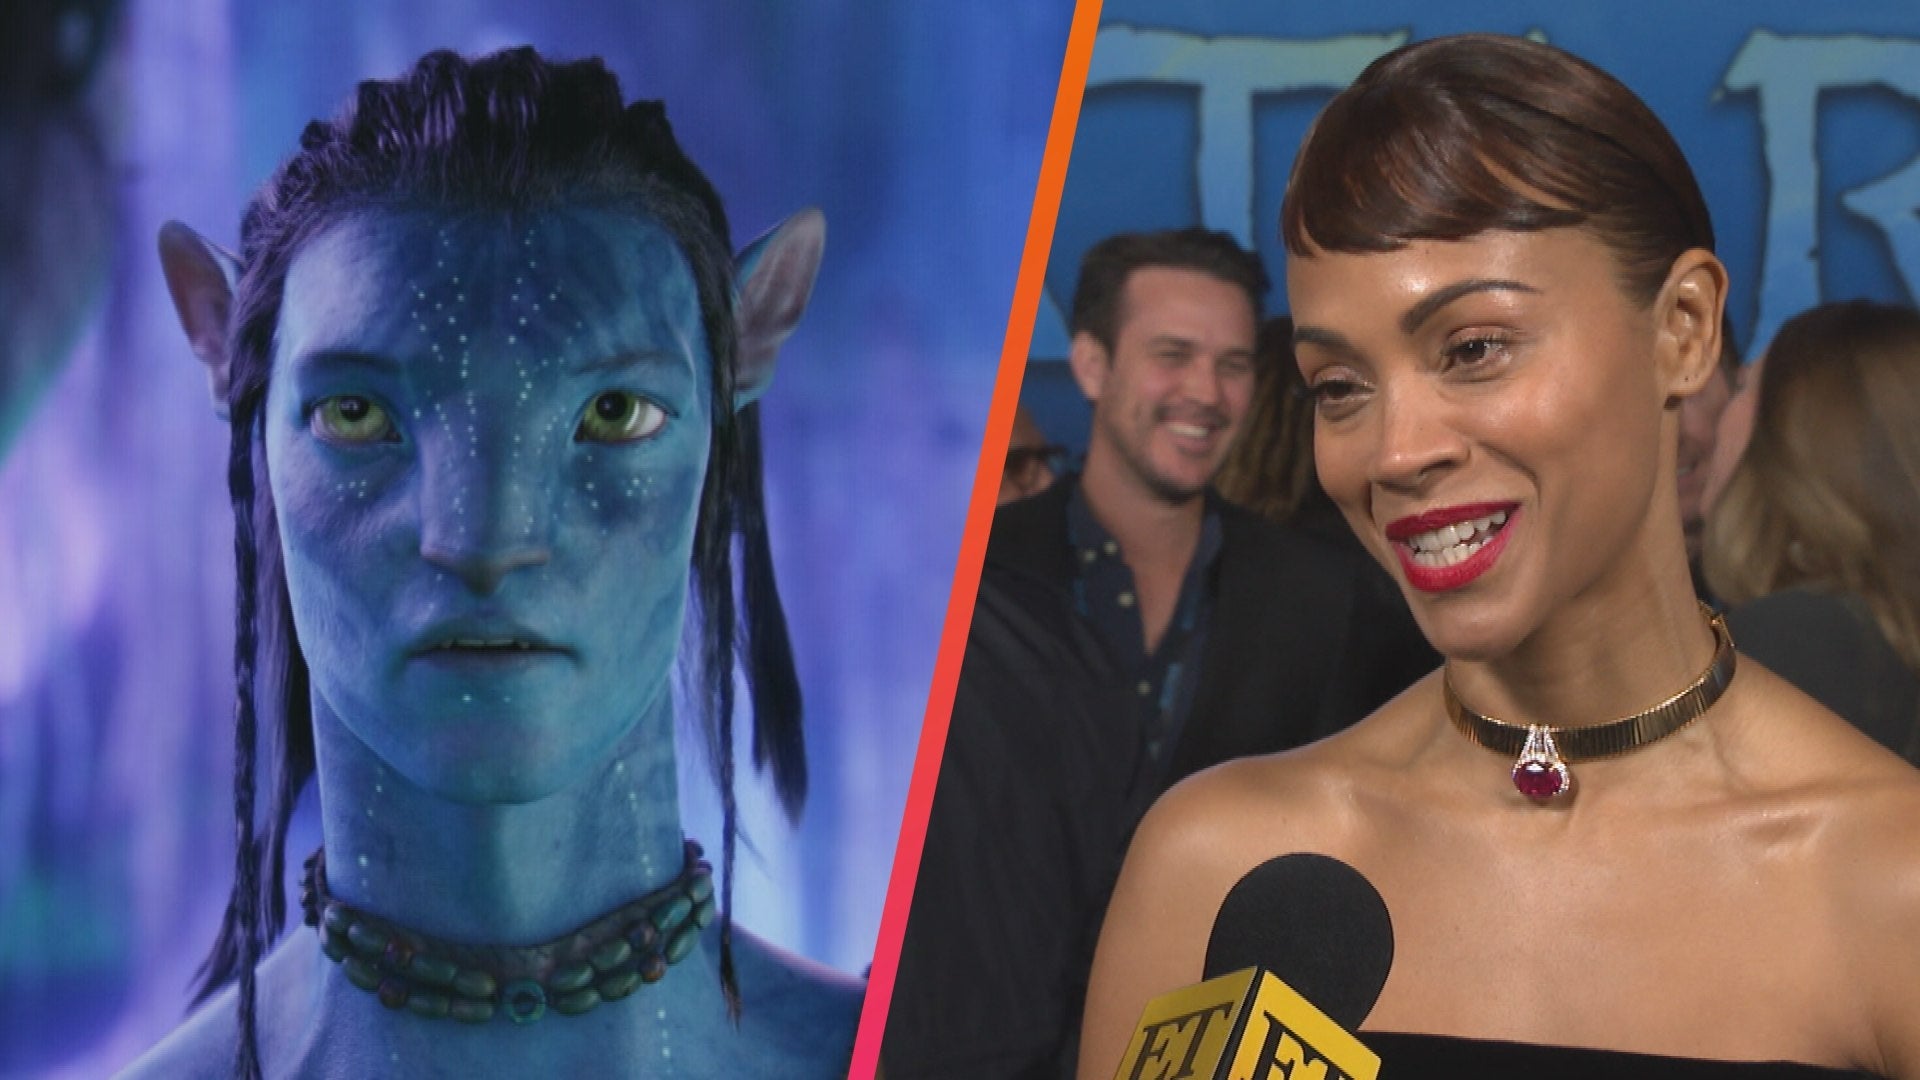 Watch Avatar Cast Recap 2009 Movie To Pregame For The Way Of Water Exclusive 4140